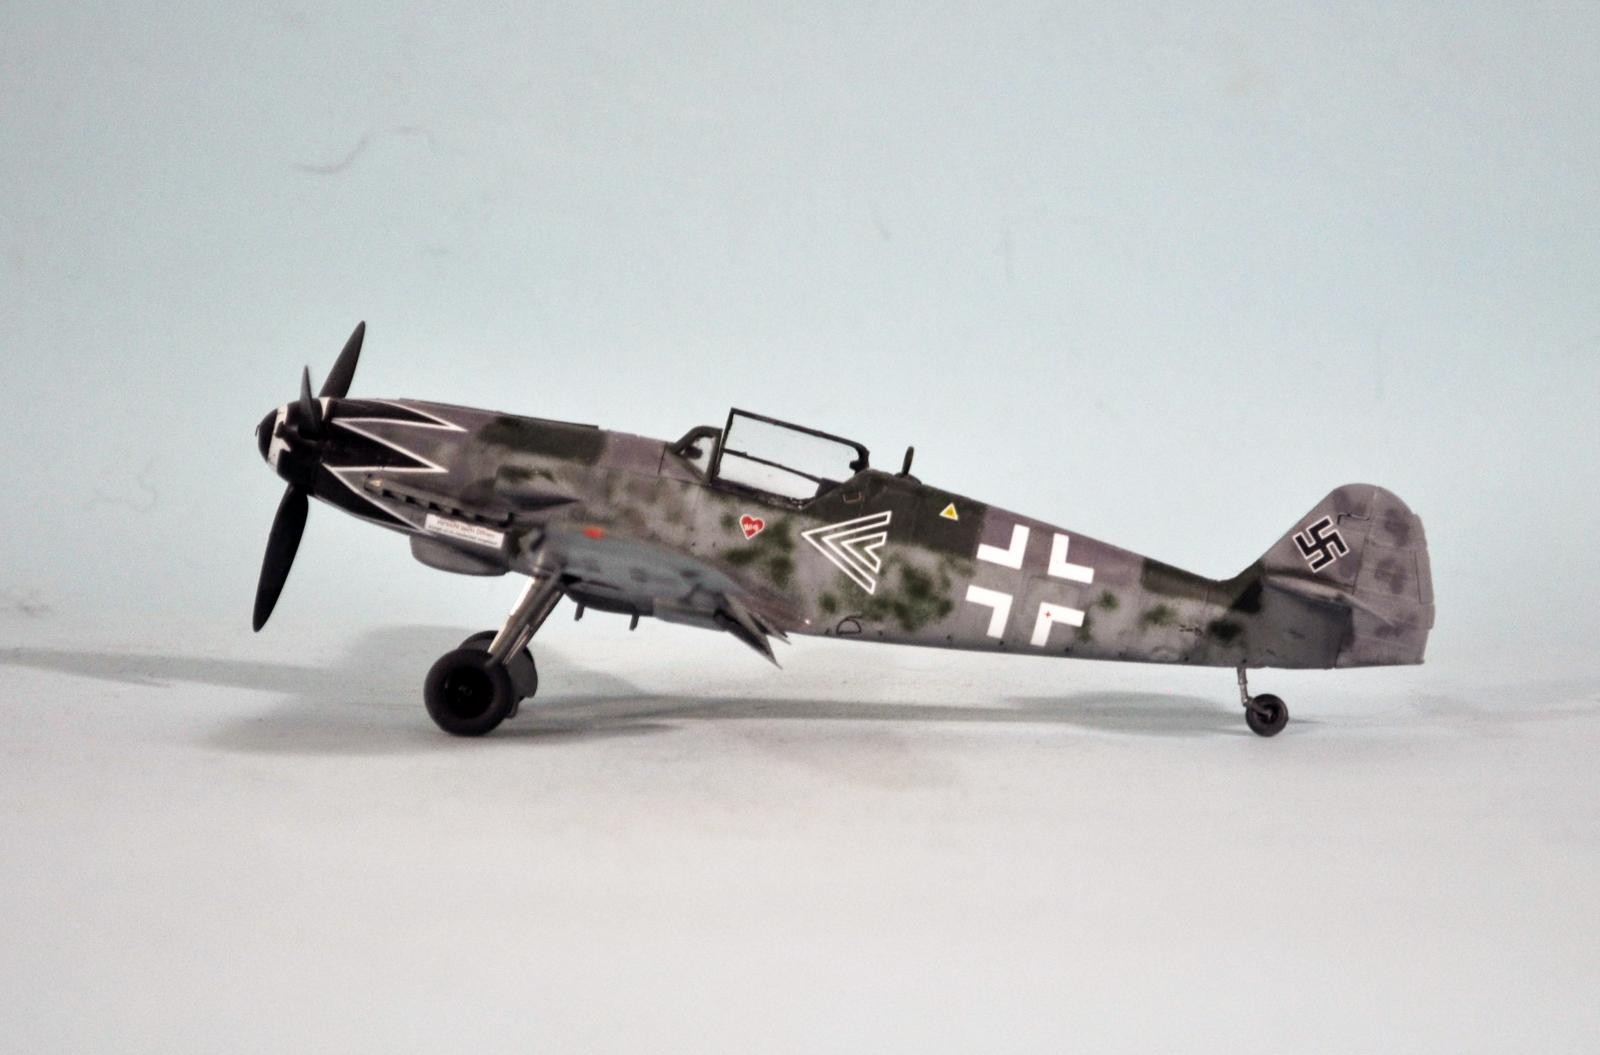 Details about   Static Aircraft Model World War II BF109 1:48 Detox Kid From Video Games 